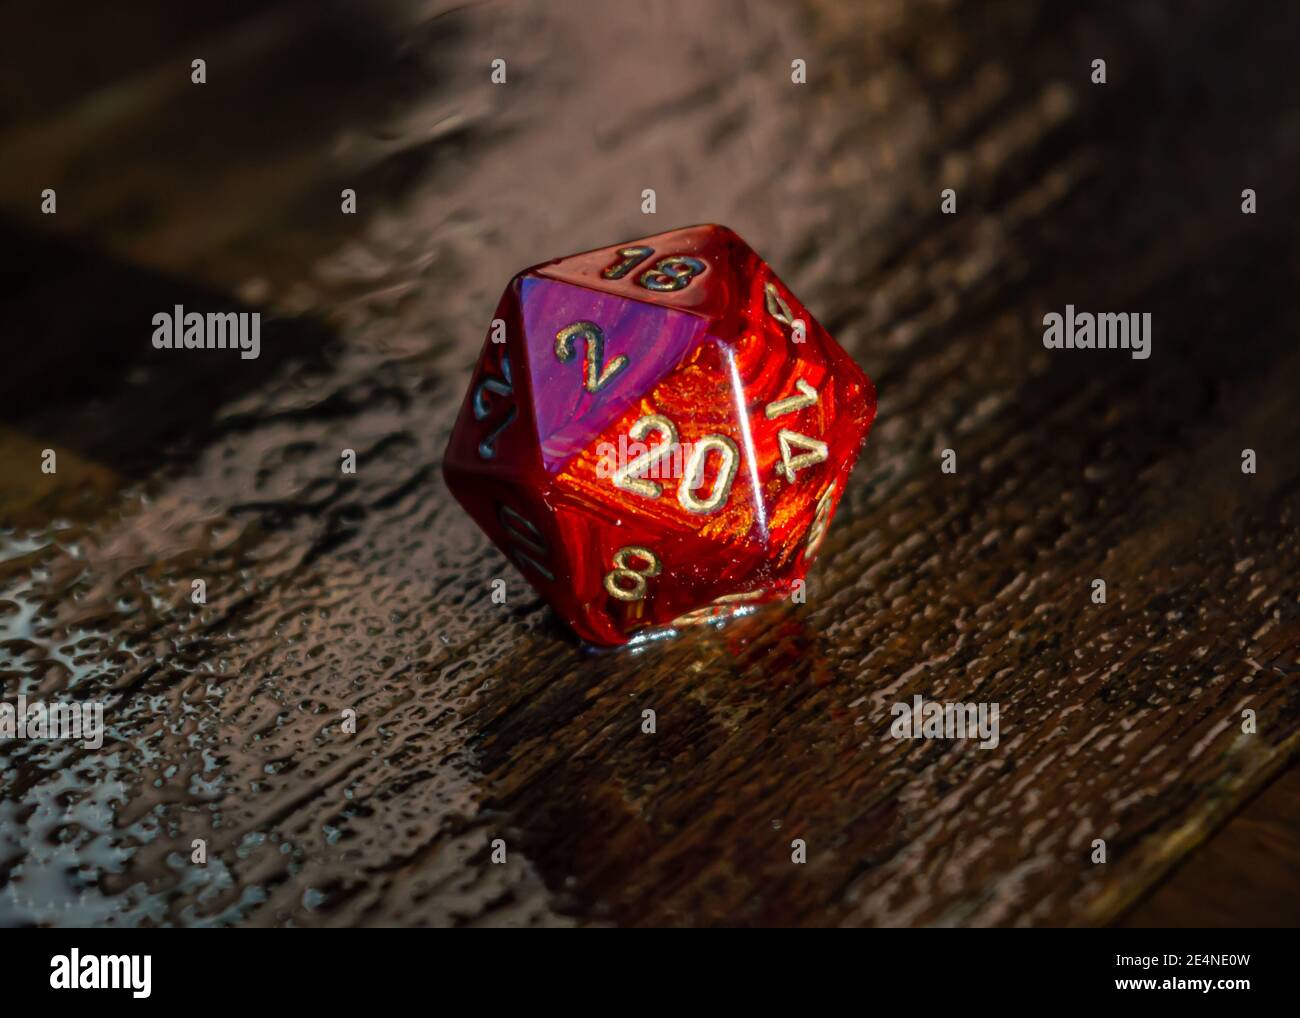 Close-up image of a marbled red 20 sided die on a wet wooden surface outside in the sunlight Stock Photo